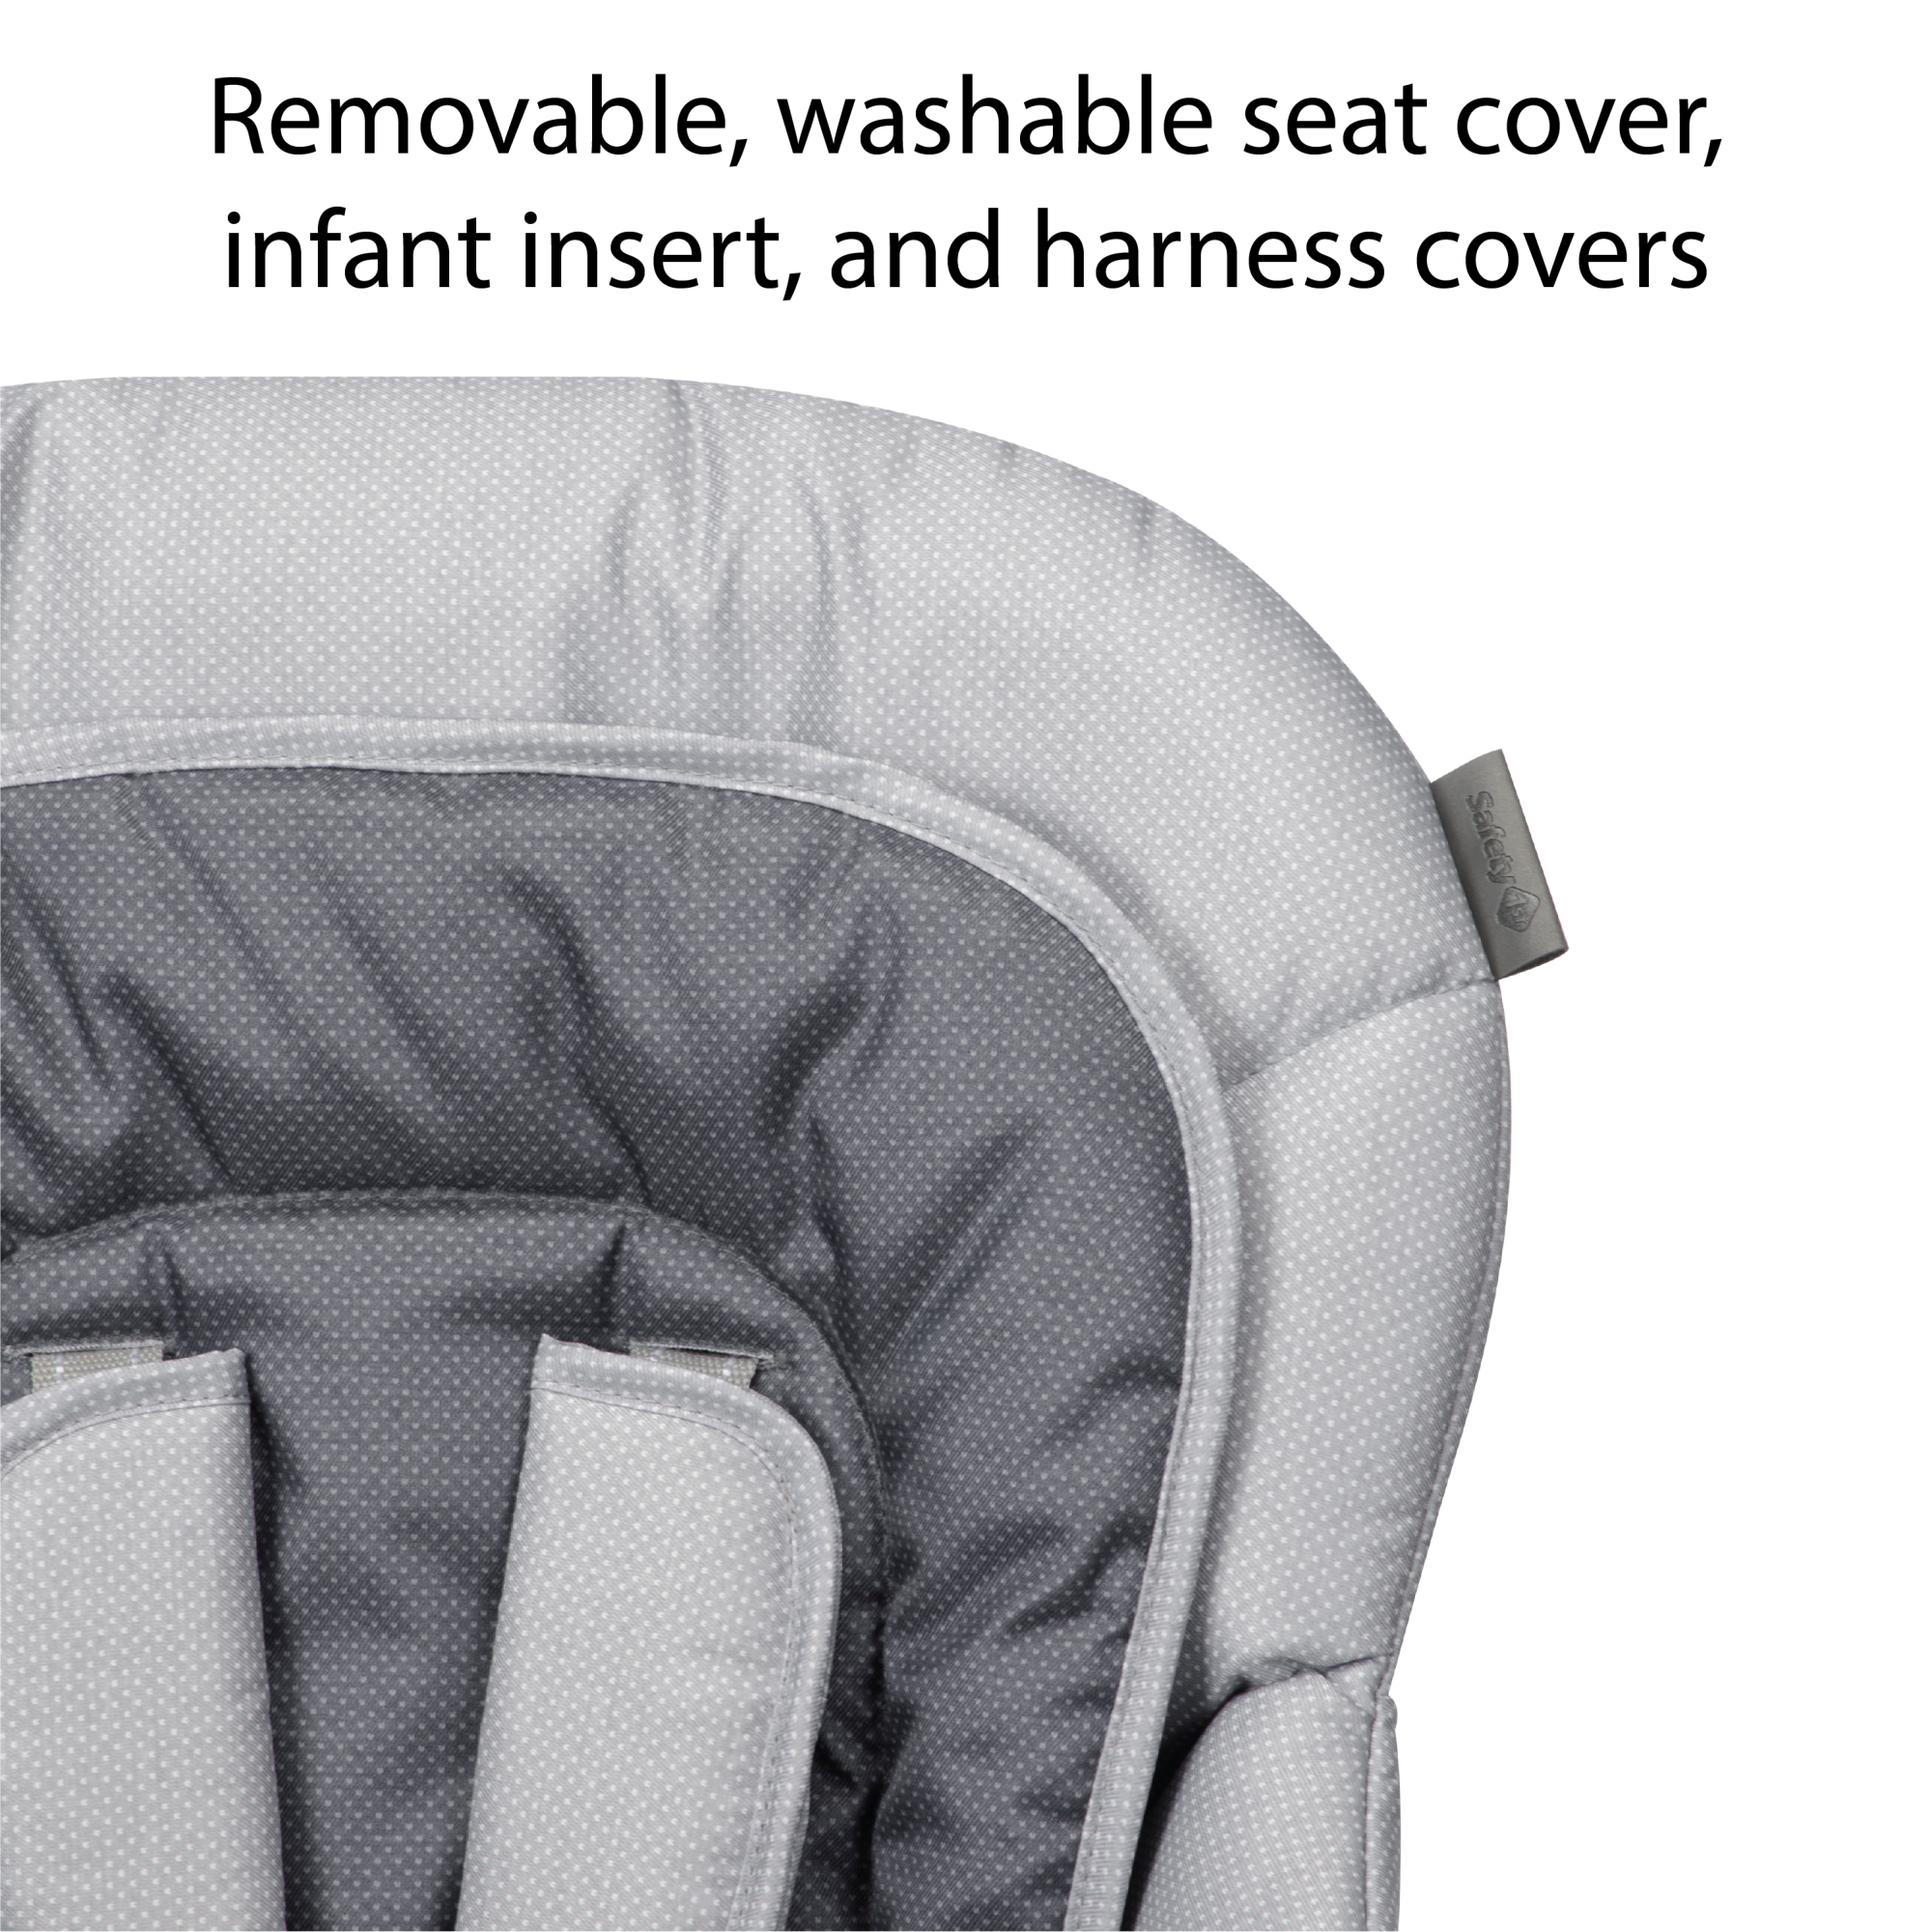 3-in-1 Grow and Go Plus High Chair - removable, washable seat cover, infant insert, and harness covers